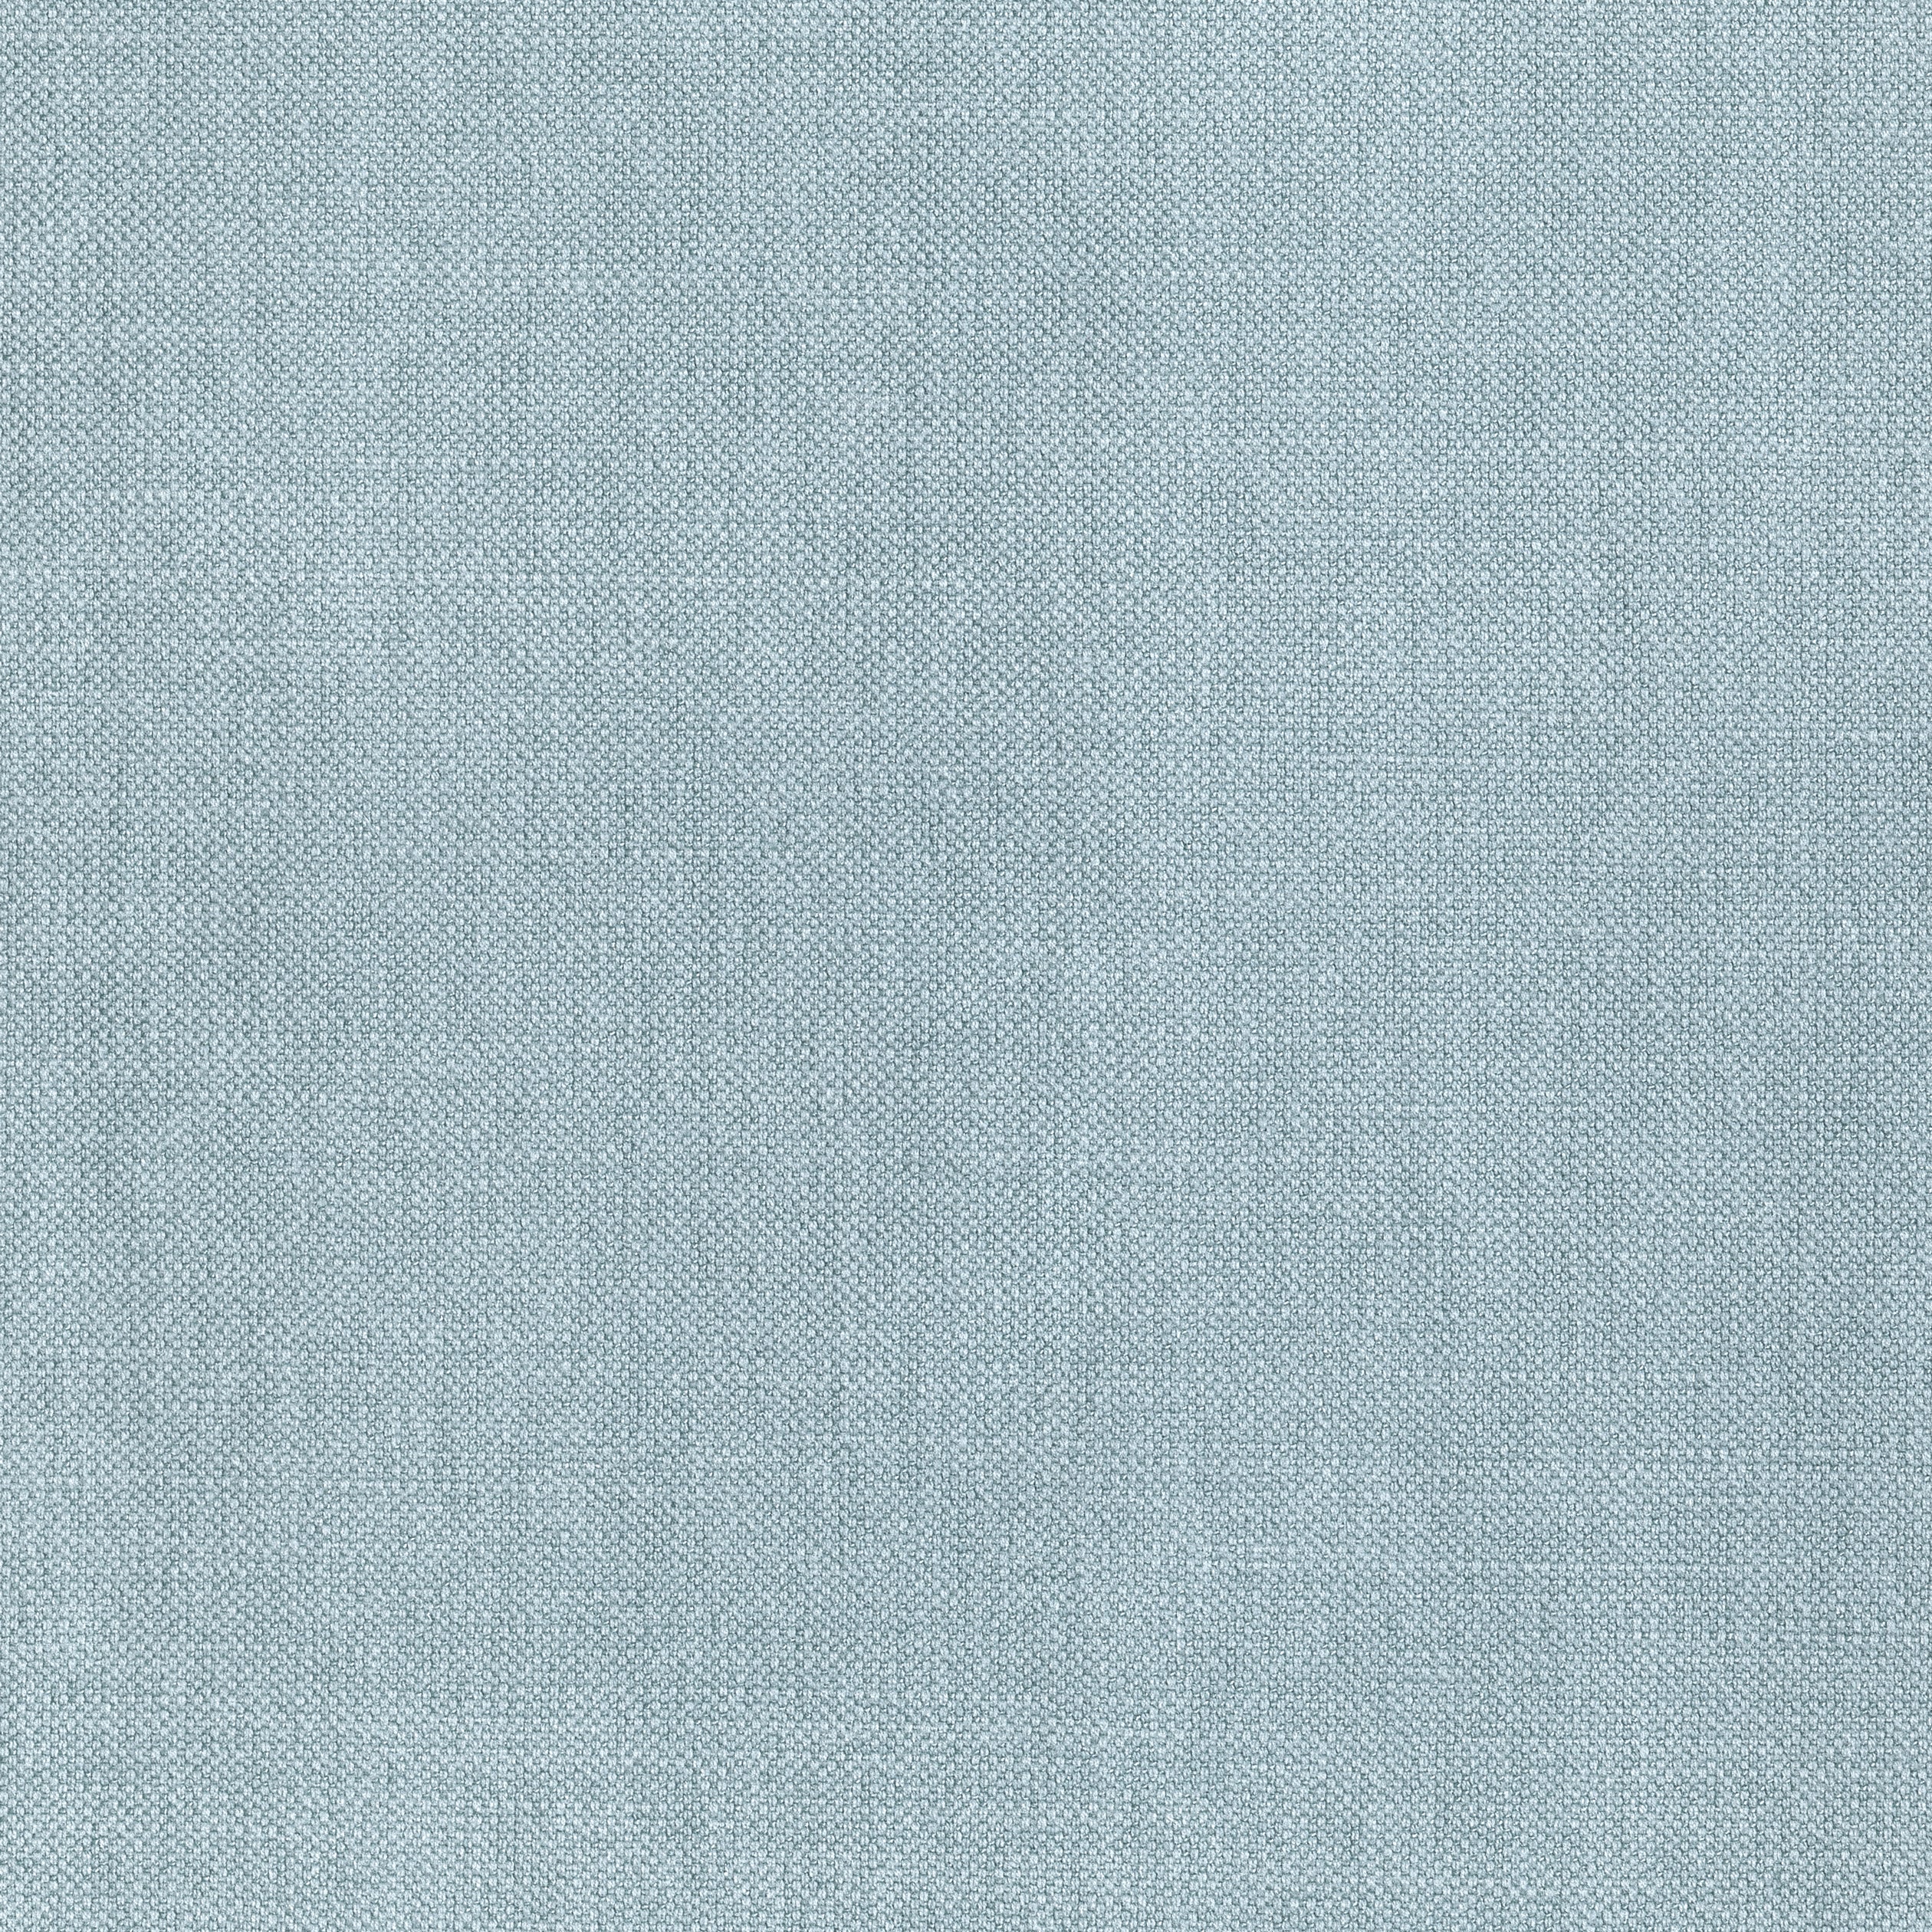 Prisma fabric in sky color - pattern number W70159 - by Thibaut in the Woven Resource Vol 12 Prisma Fabrics collection